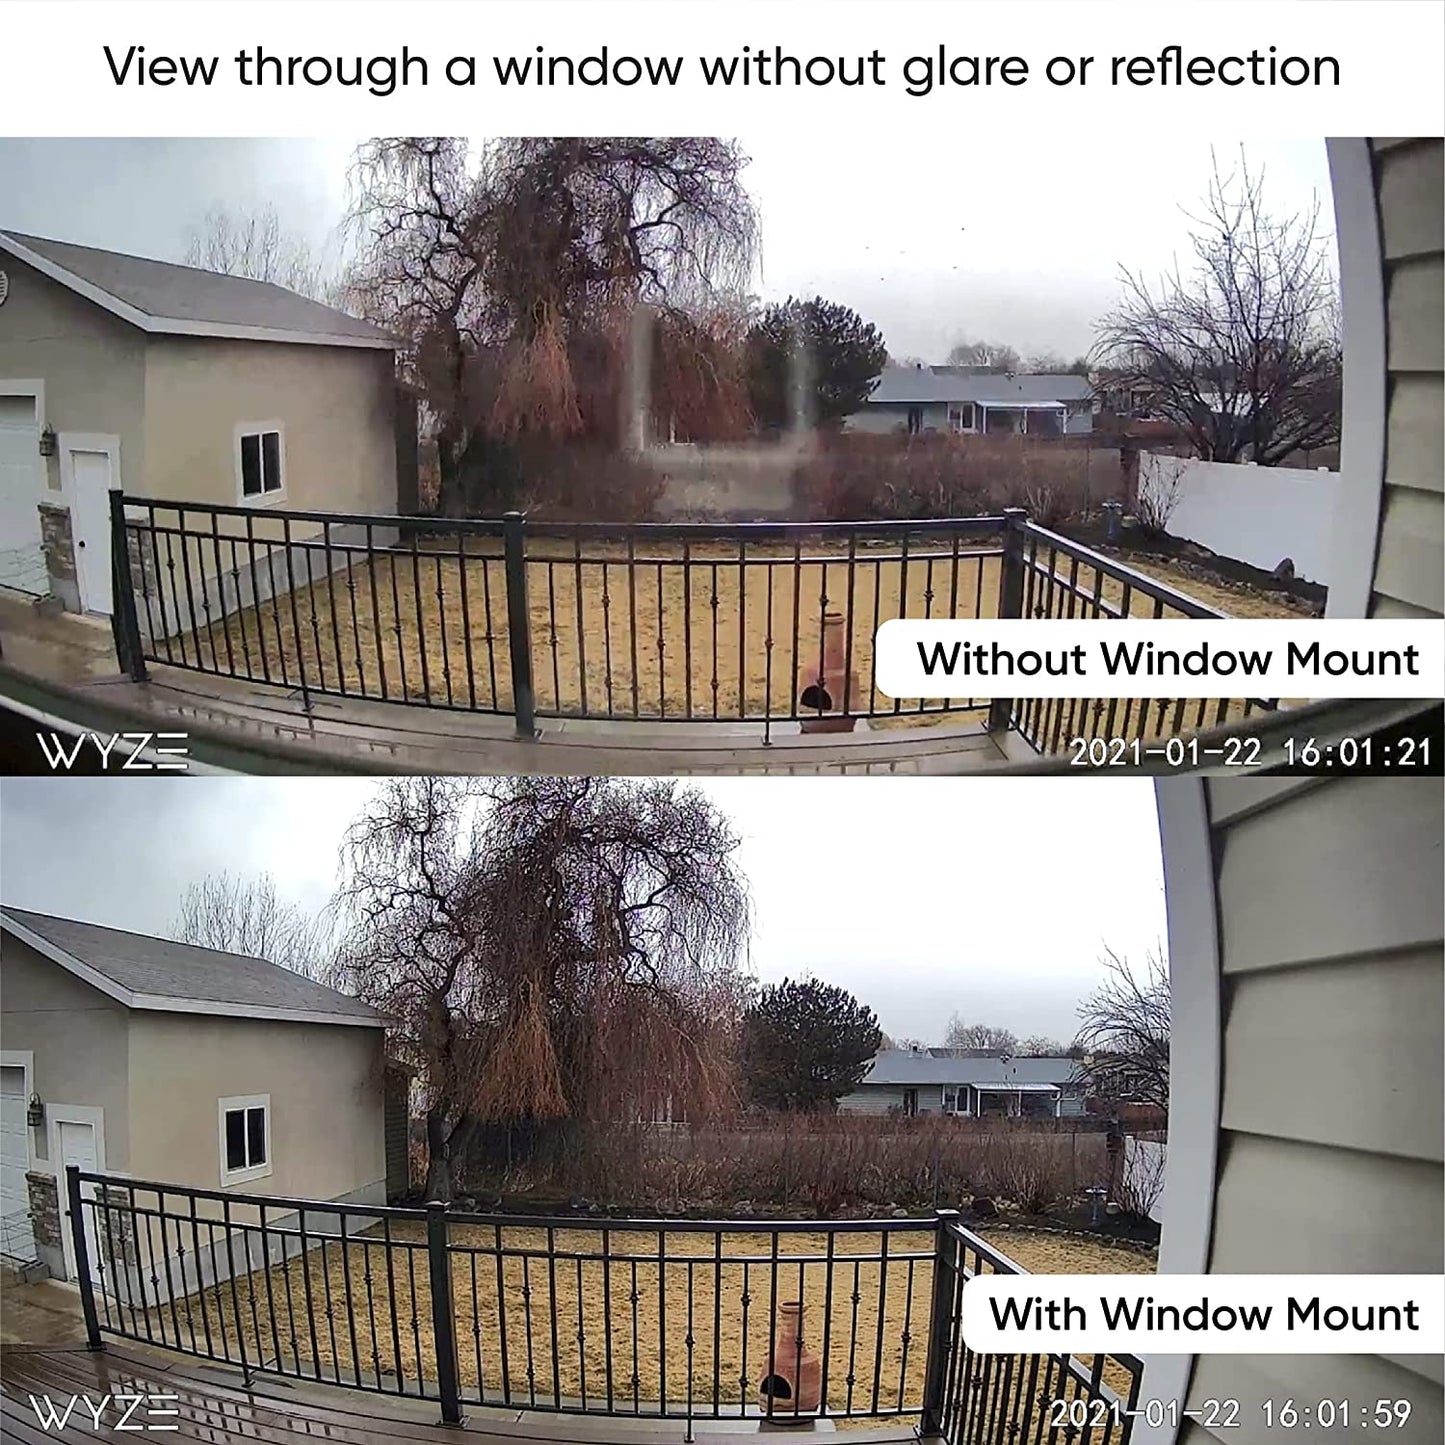 Picture comparison between a camera's picture with and without window mount. Text overlay that says "View through a window without glare or reflection."